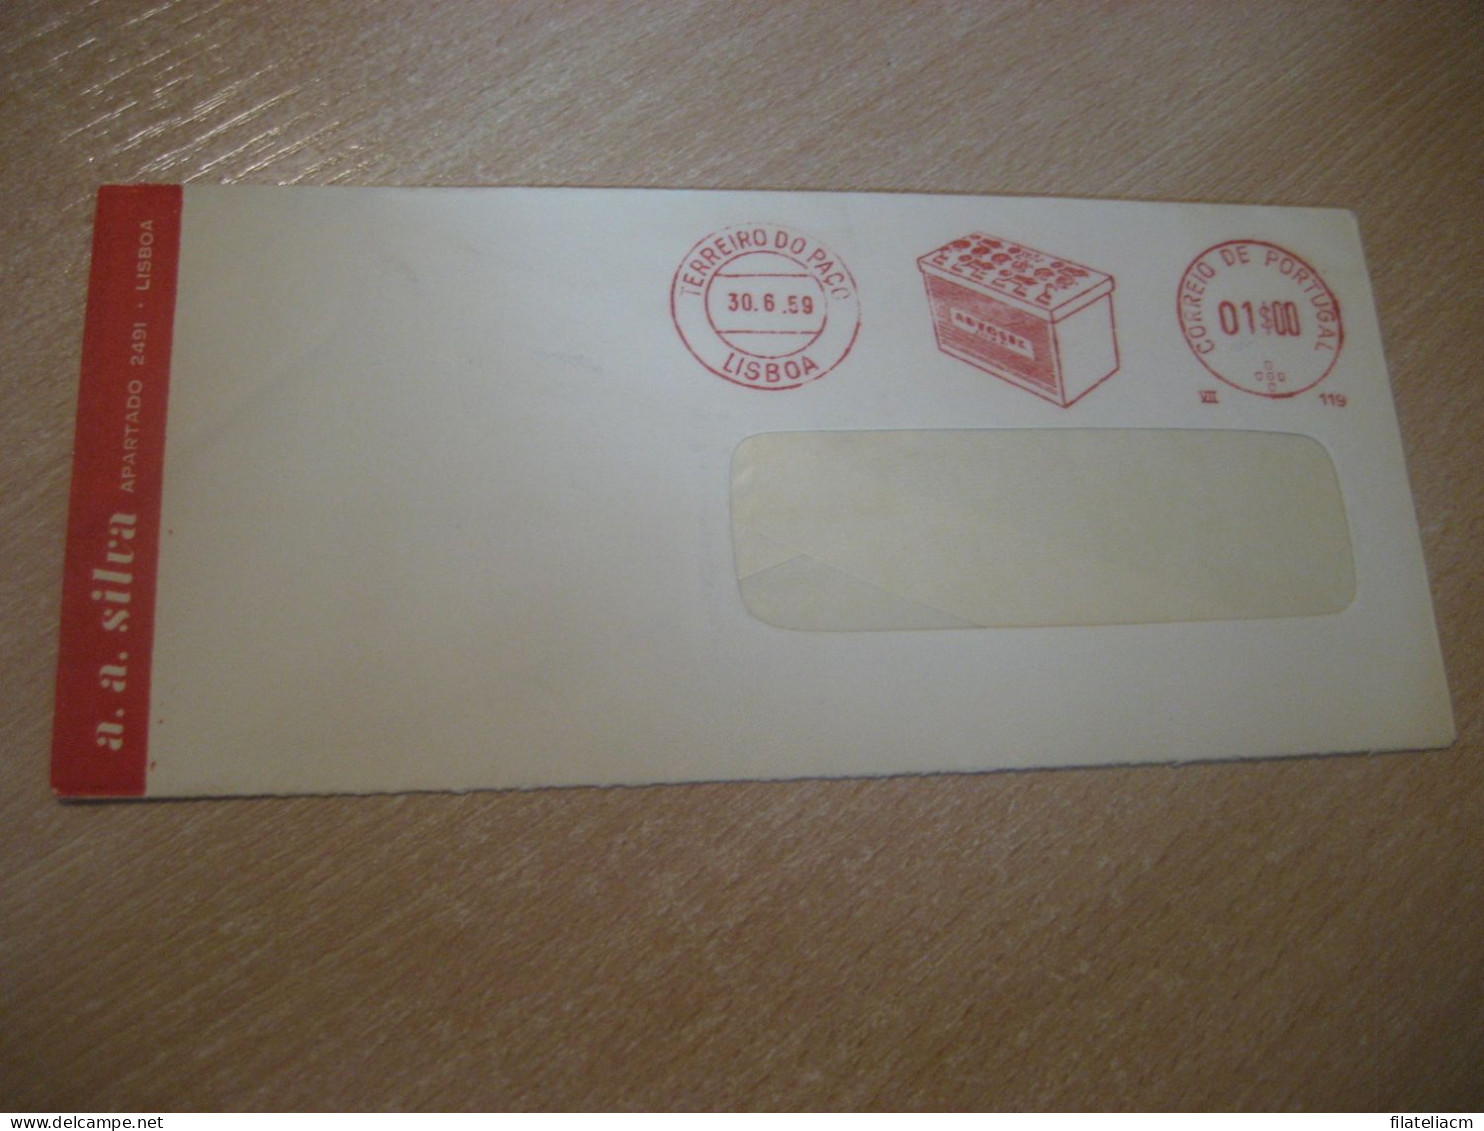 LISBOA 1959 Autosol Battery Car Meter Mail Cancel Cover PORTUGAL - Lettres & Documents